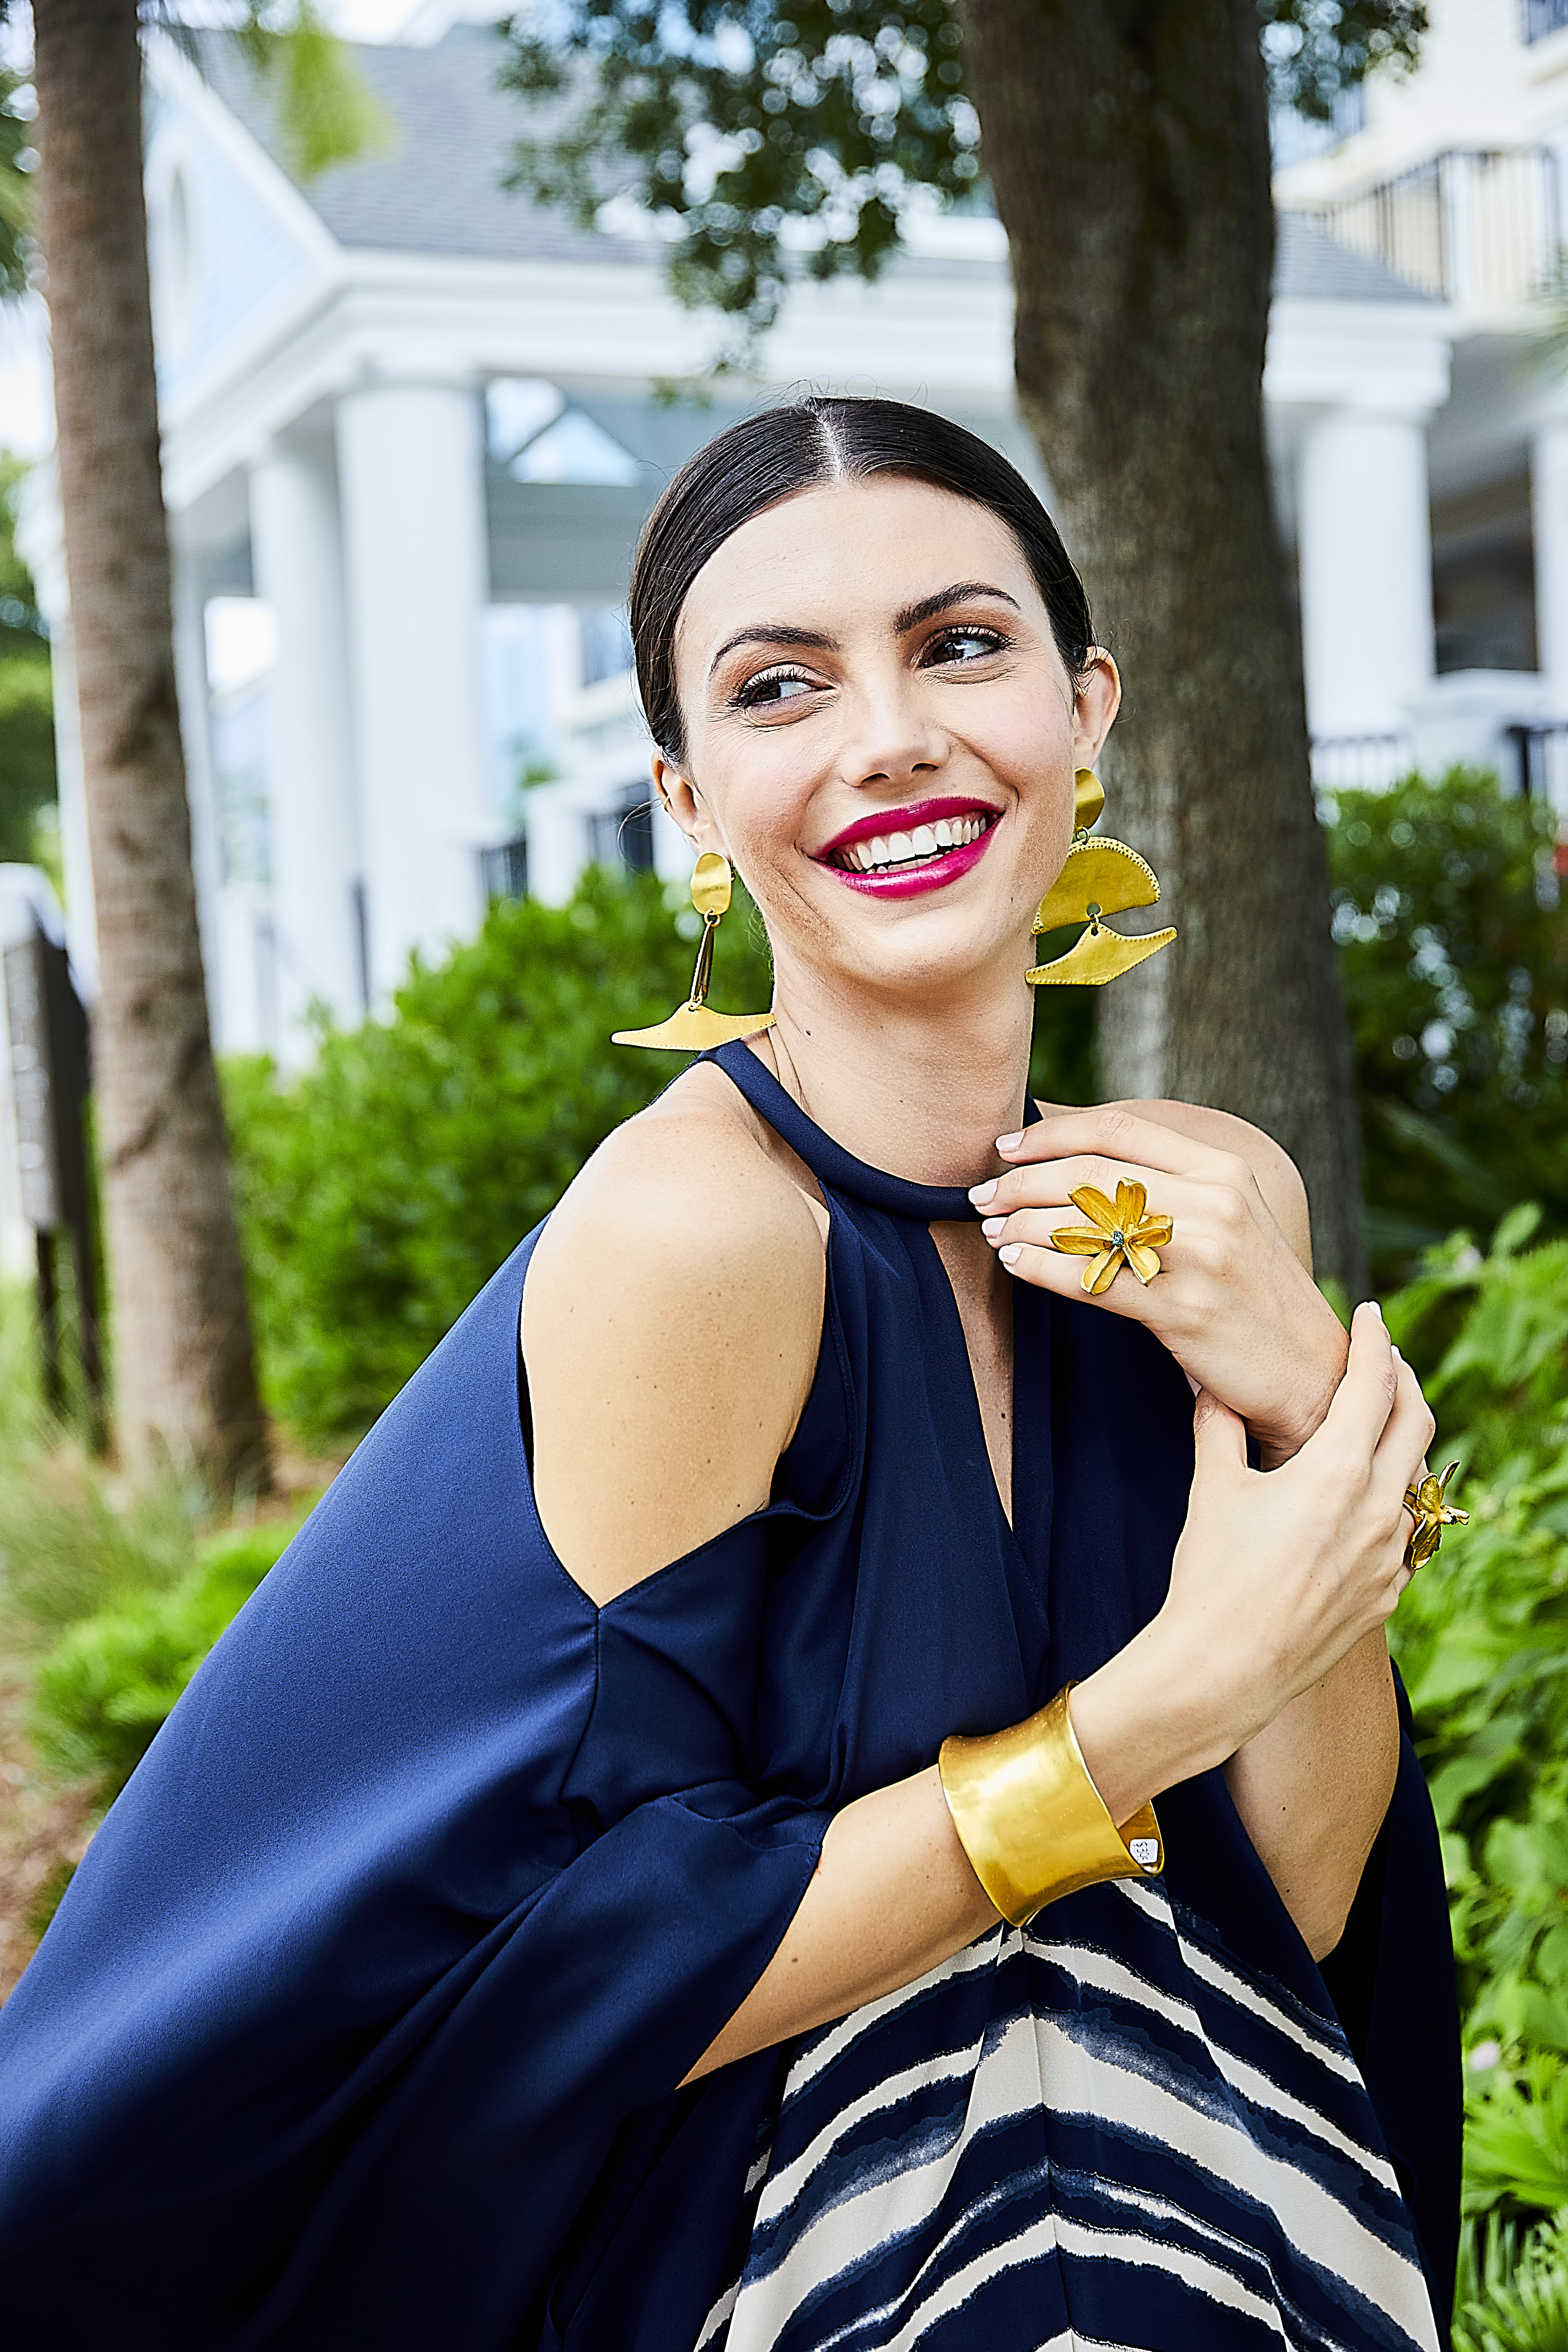 Flower Power: St. John “Brushstroke” printed silk crepe kaftan, $2,795 at St. John Boutique at the Shops at Belmond Charleston Place;  “Baudo” earrings, $330, Amazonian wide brass cuff, $395, gold flower ring with stone, $340, and emerald orchid ring, $340, all at Ibu